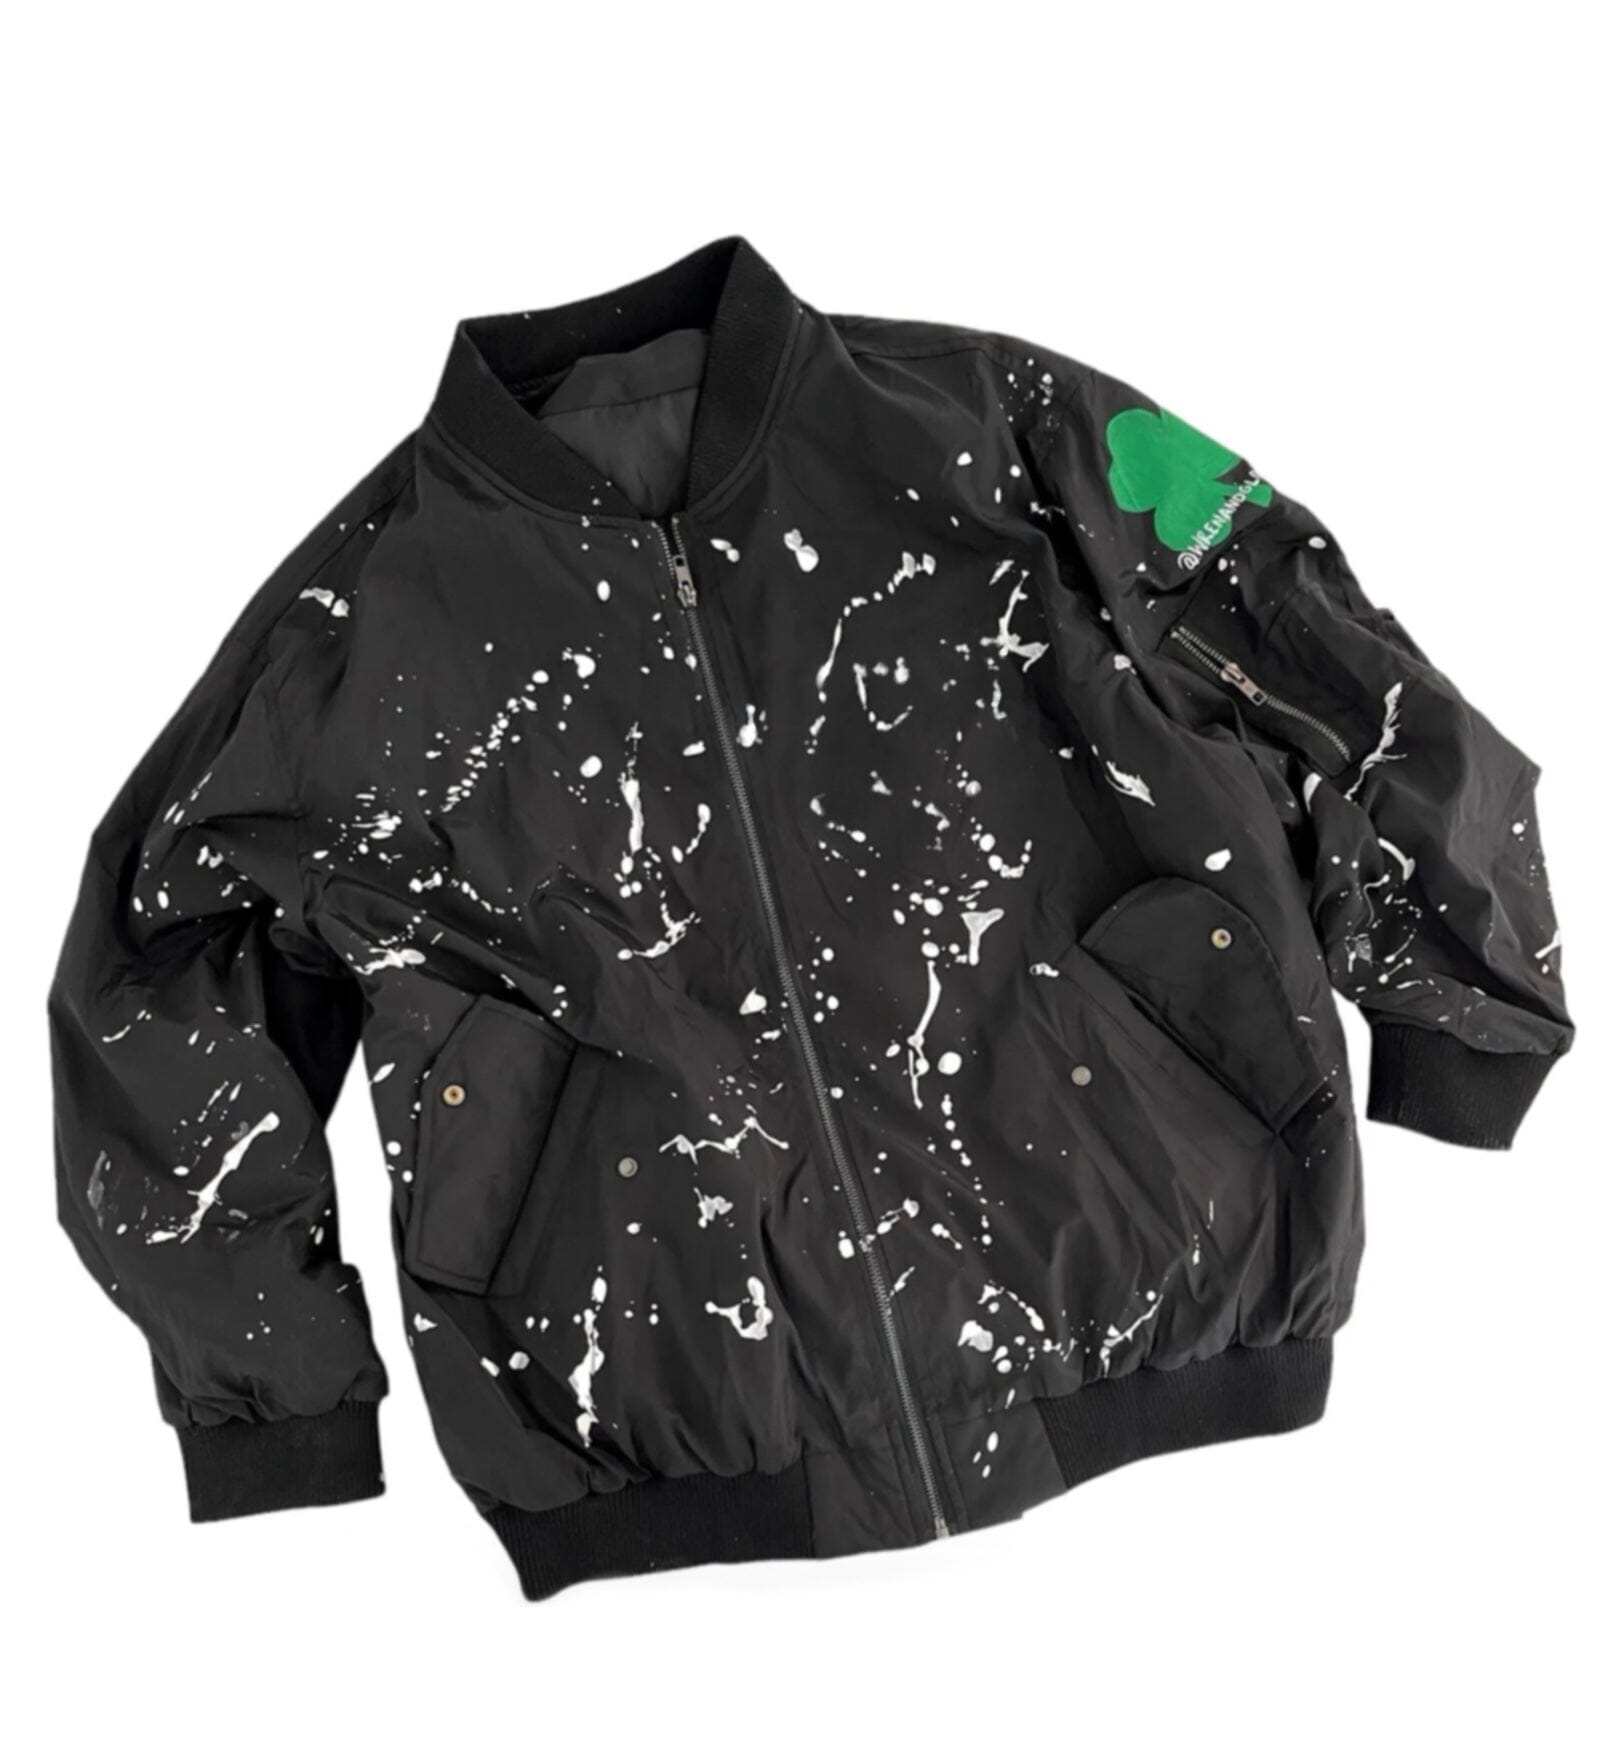 'My Lucky Jacket' Painted Bomber